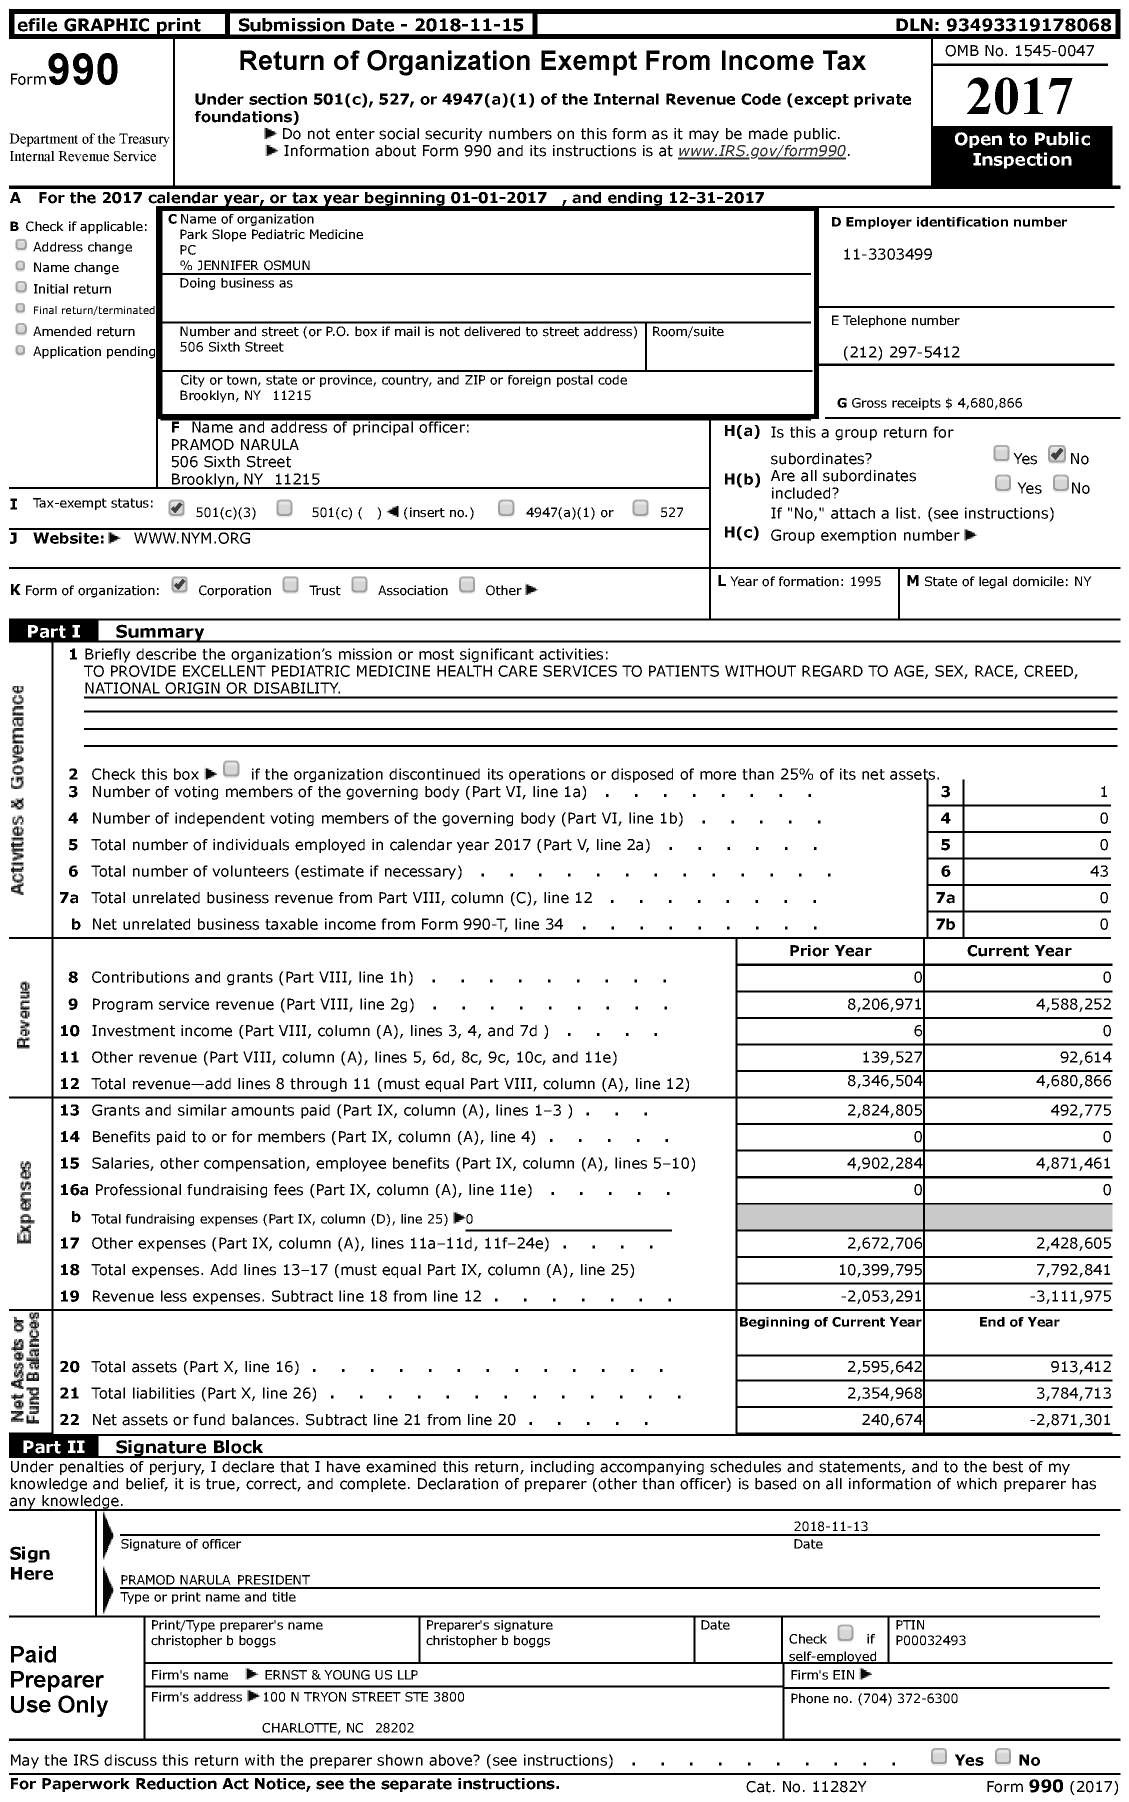 Image of first page of 2017 Form 990 for New York Methodist Hospital (NYM)